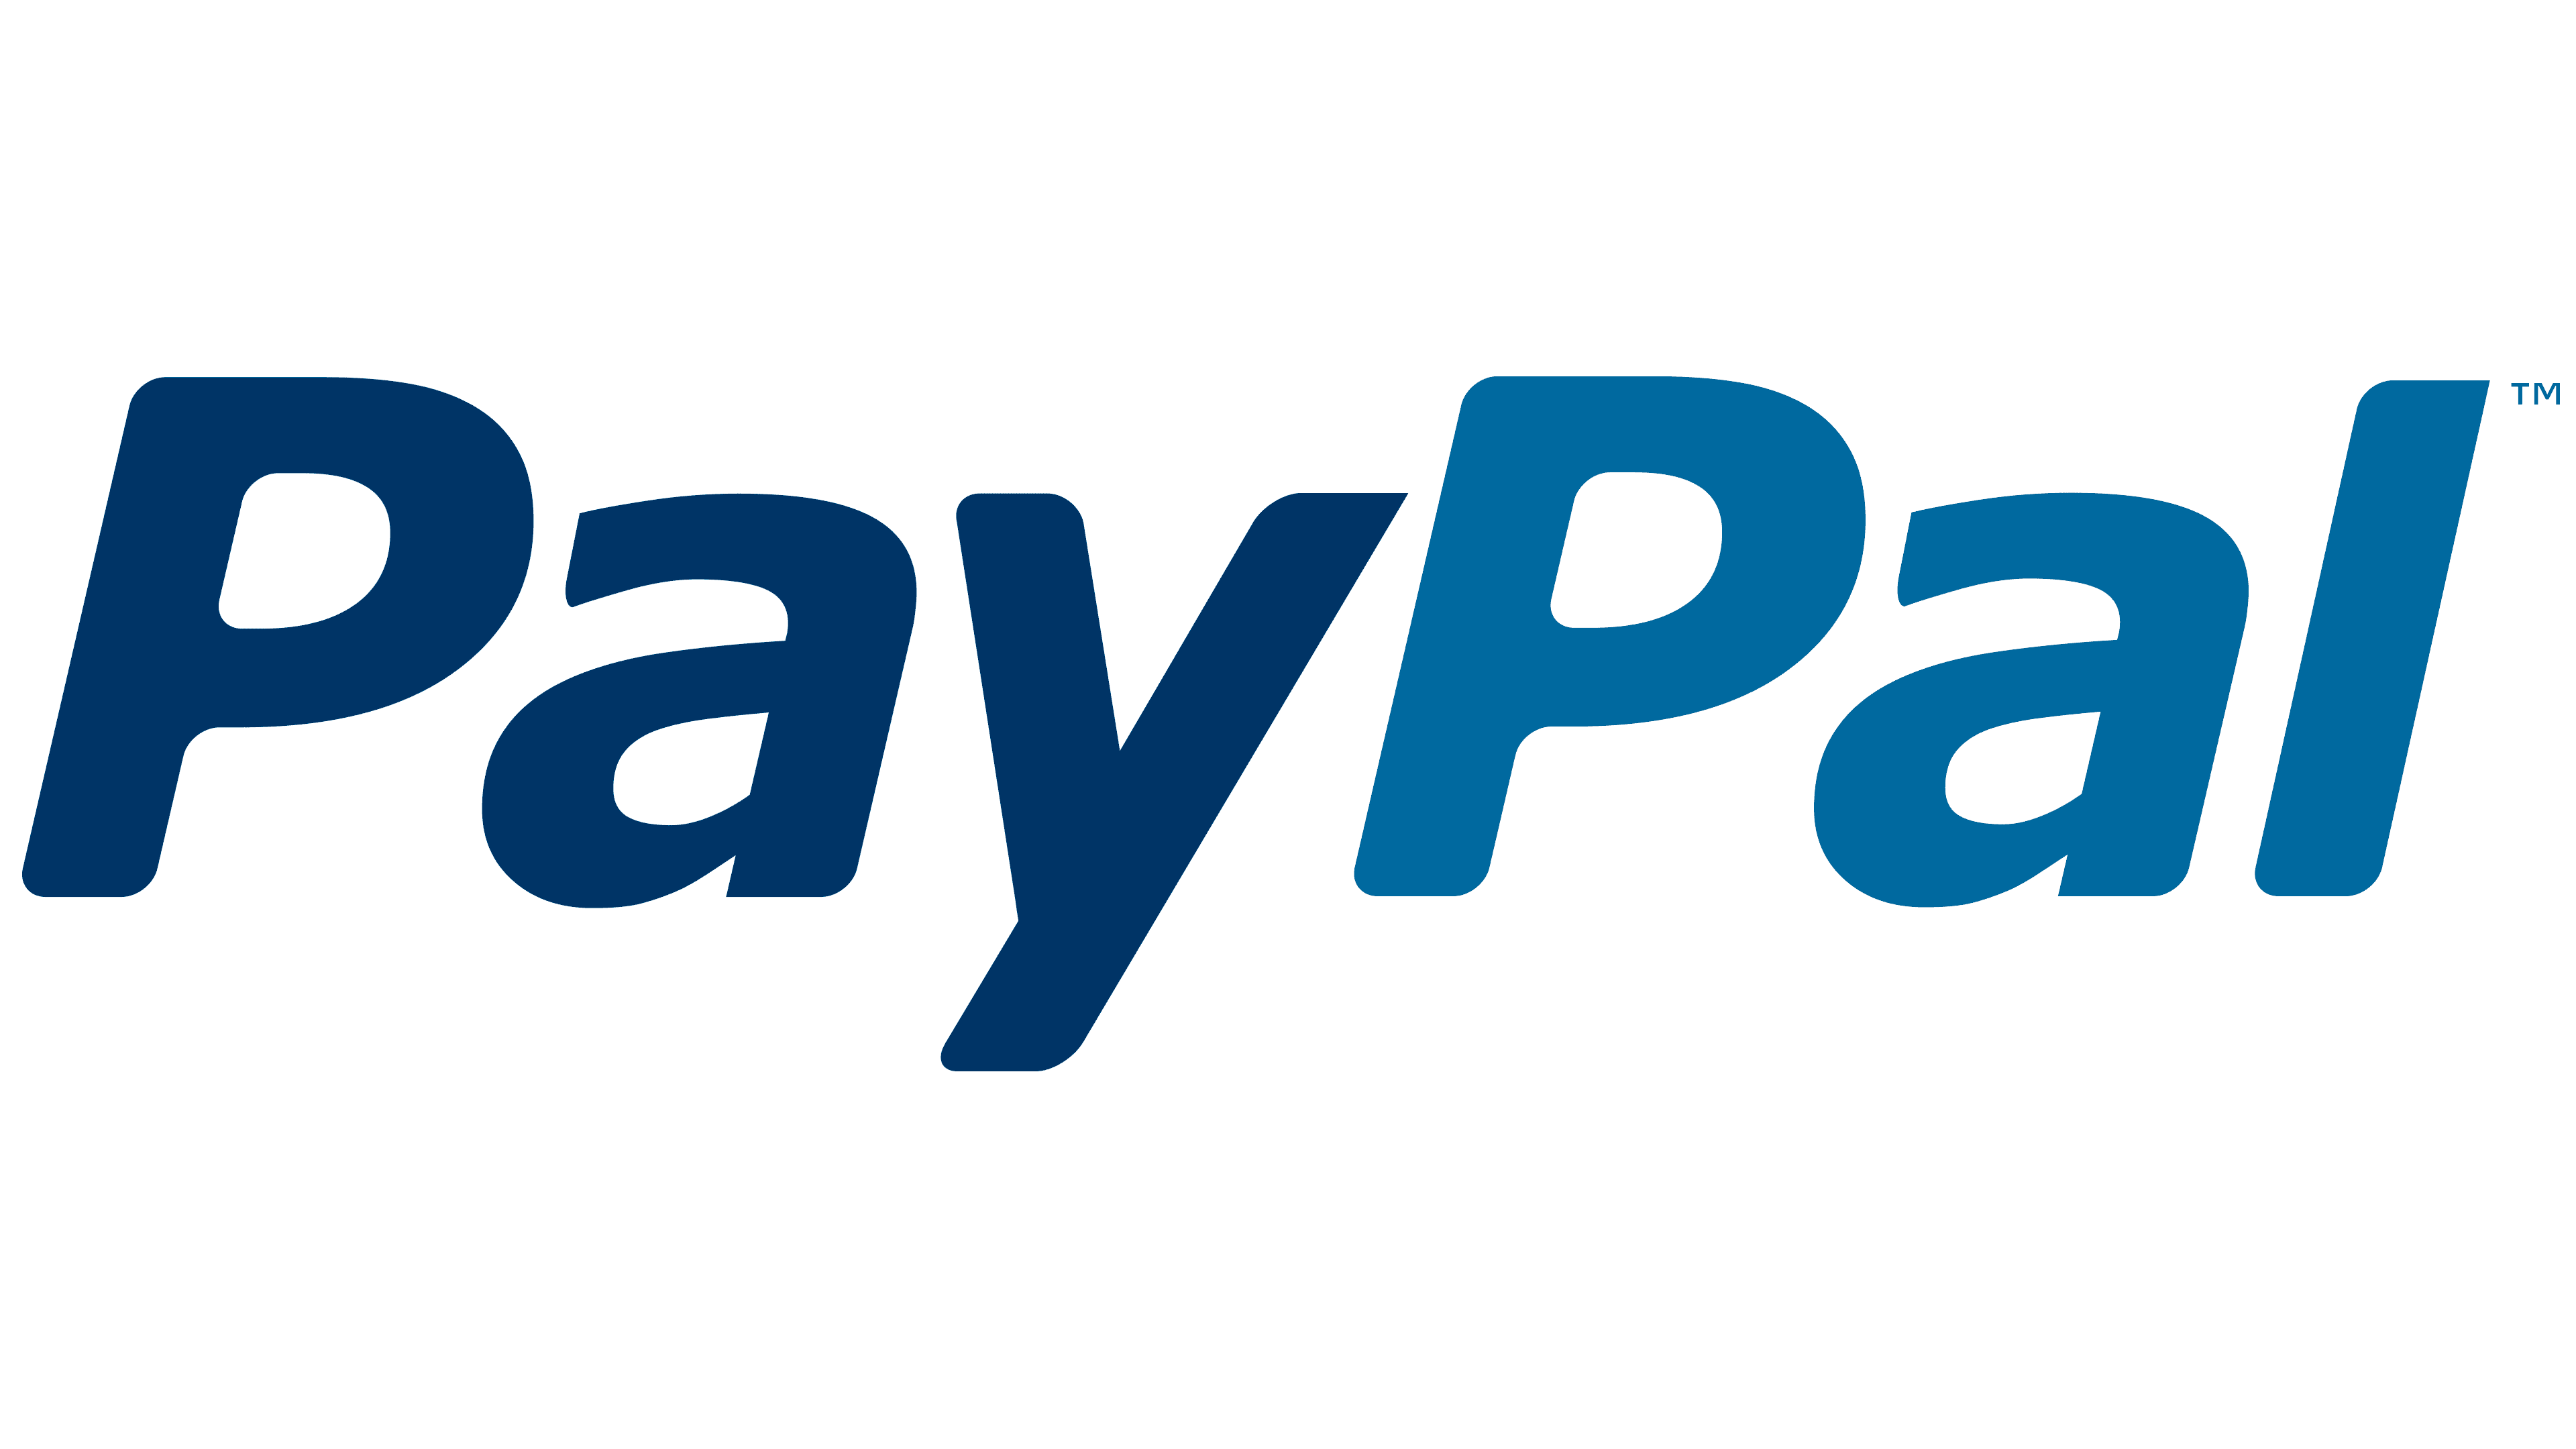 Paypal Unveils New Logo And Powering The People Economy Campaign - Gambaran